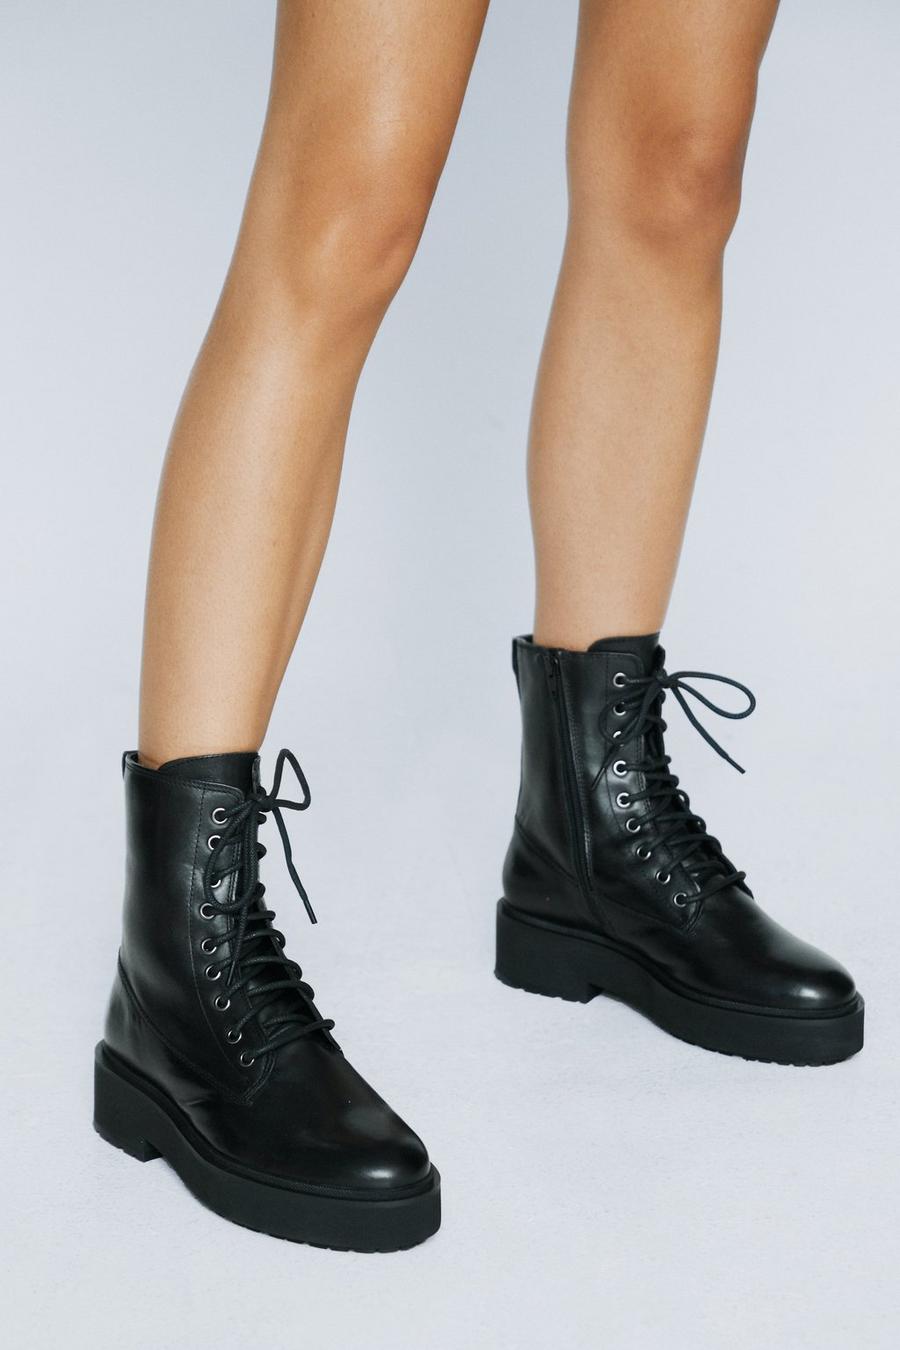 Real Leather Lace Up Biker Boot  